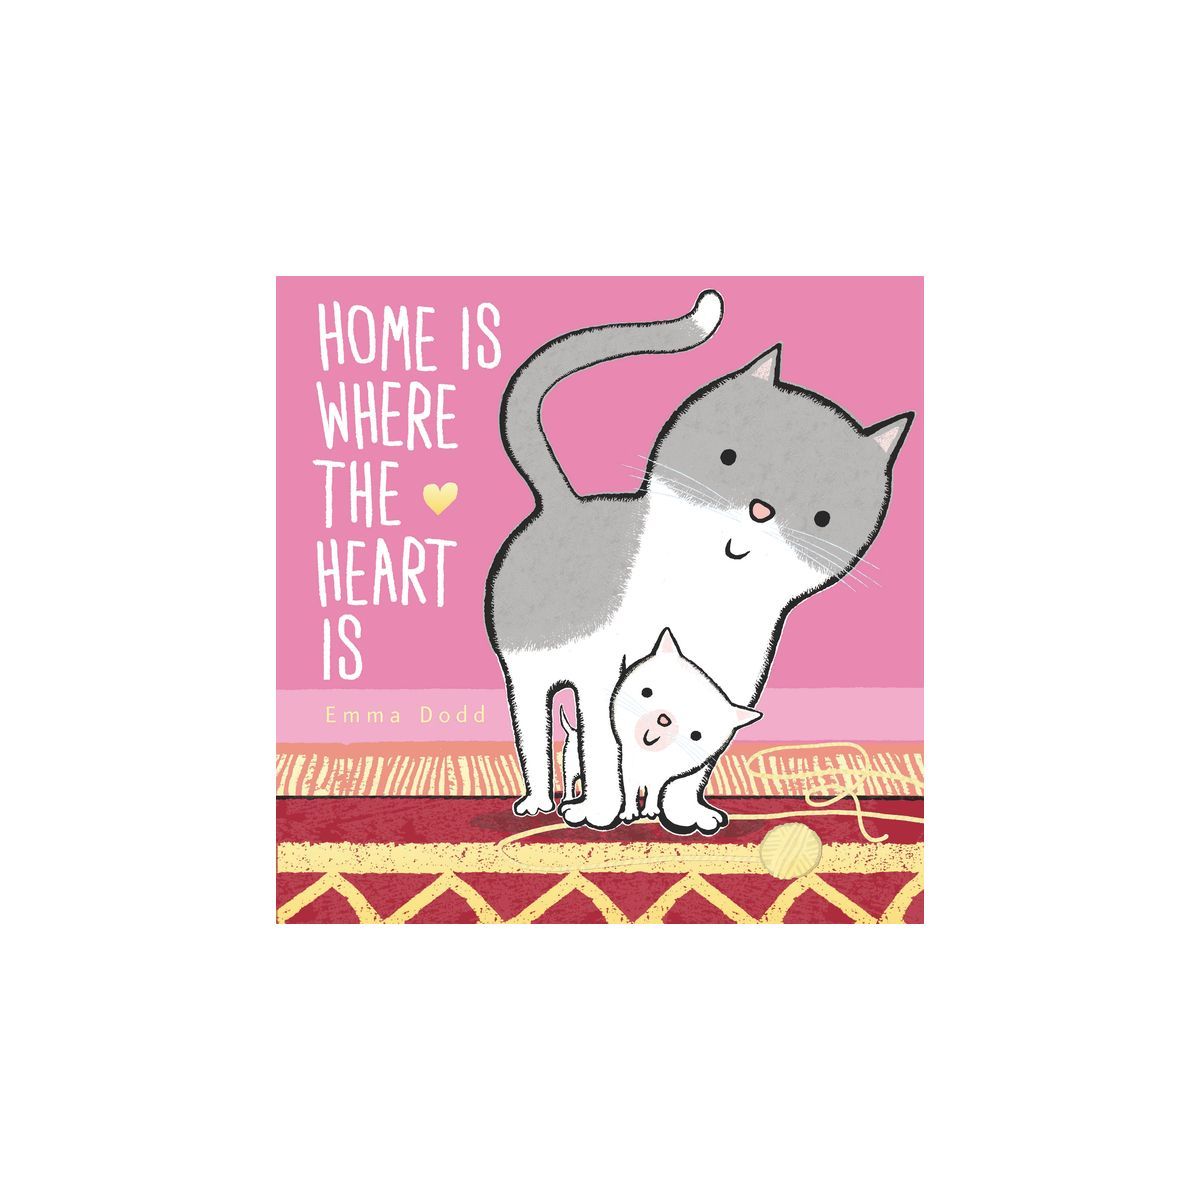 Home Is Where the Heart Is - (Emma Dodd's Love You Books) by Emma Dodd | Target